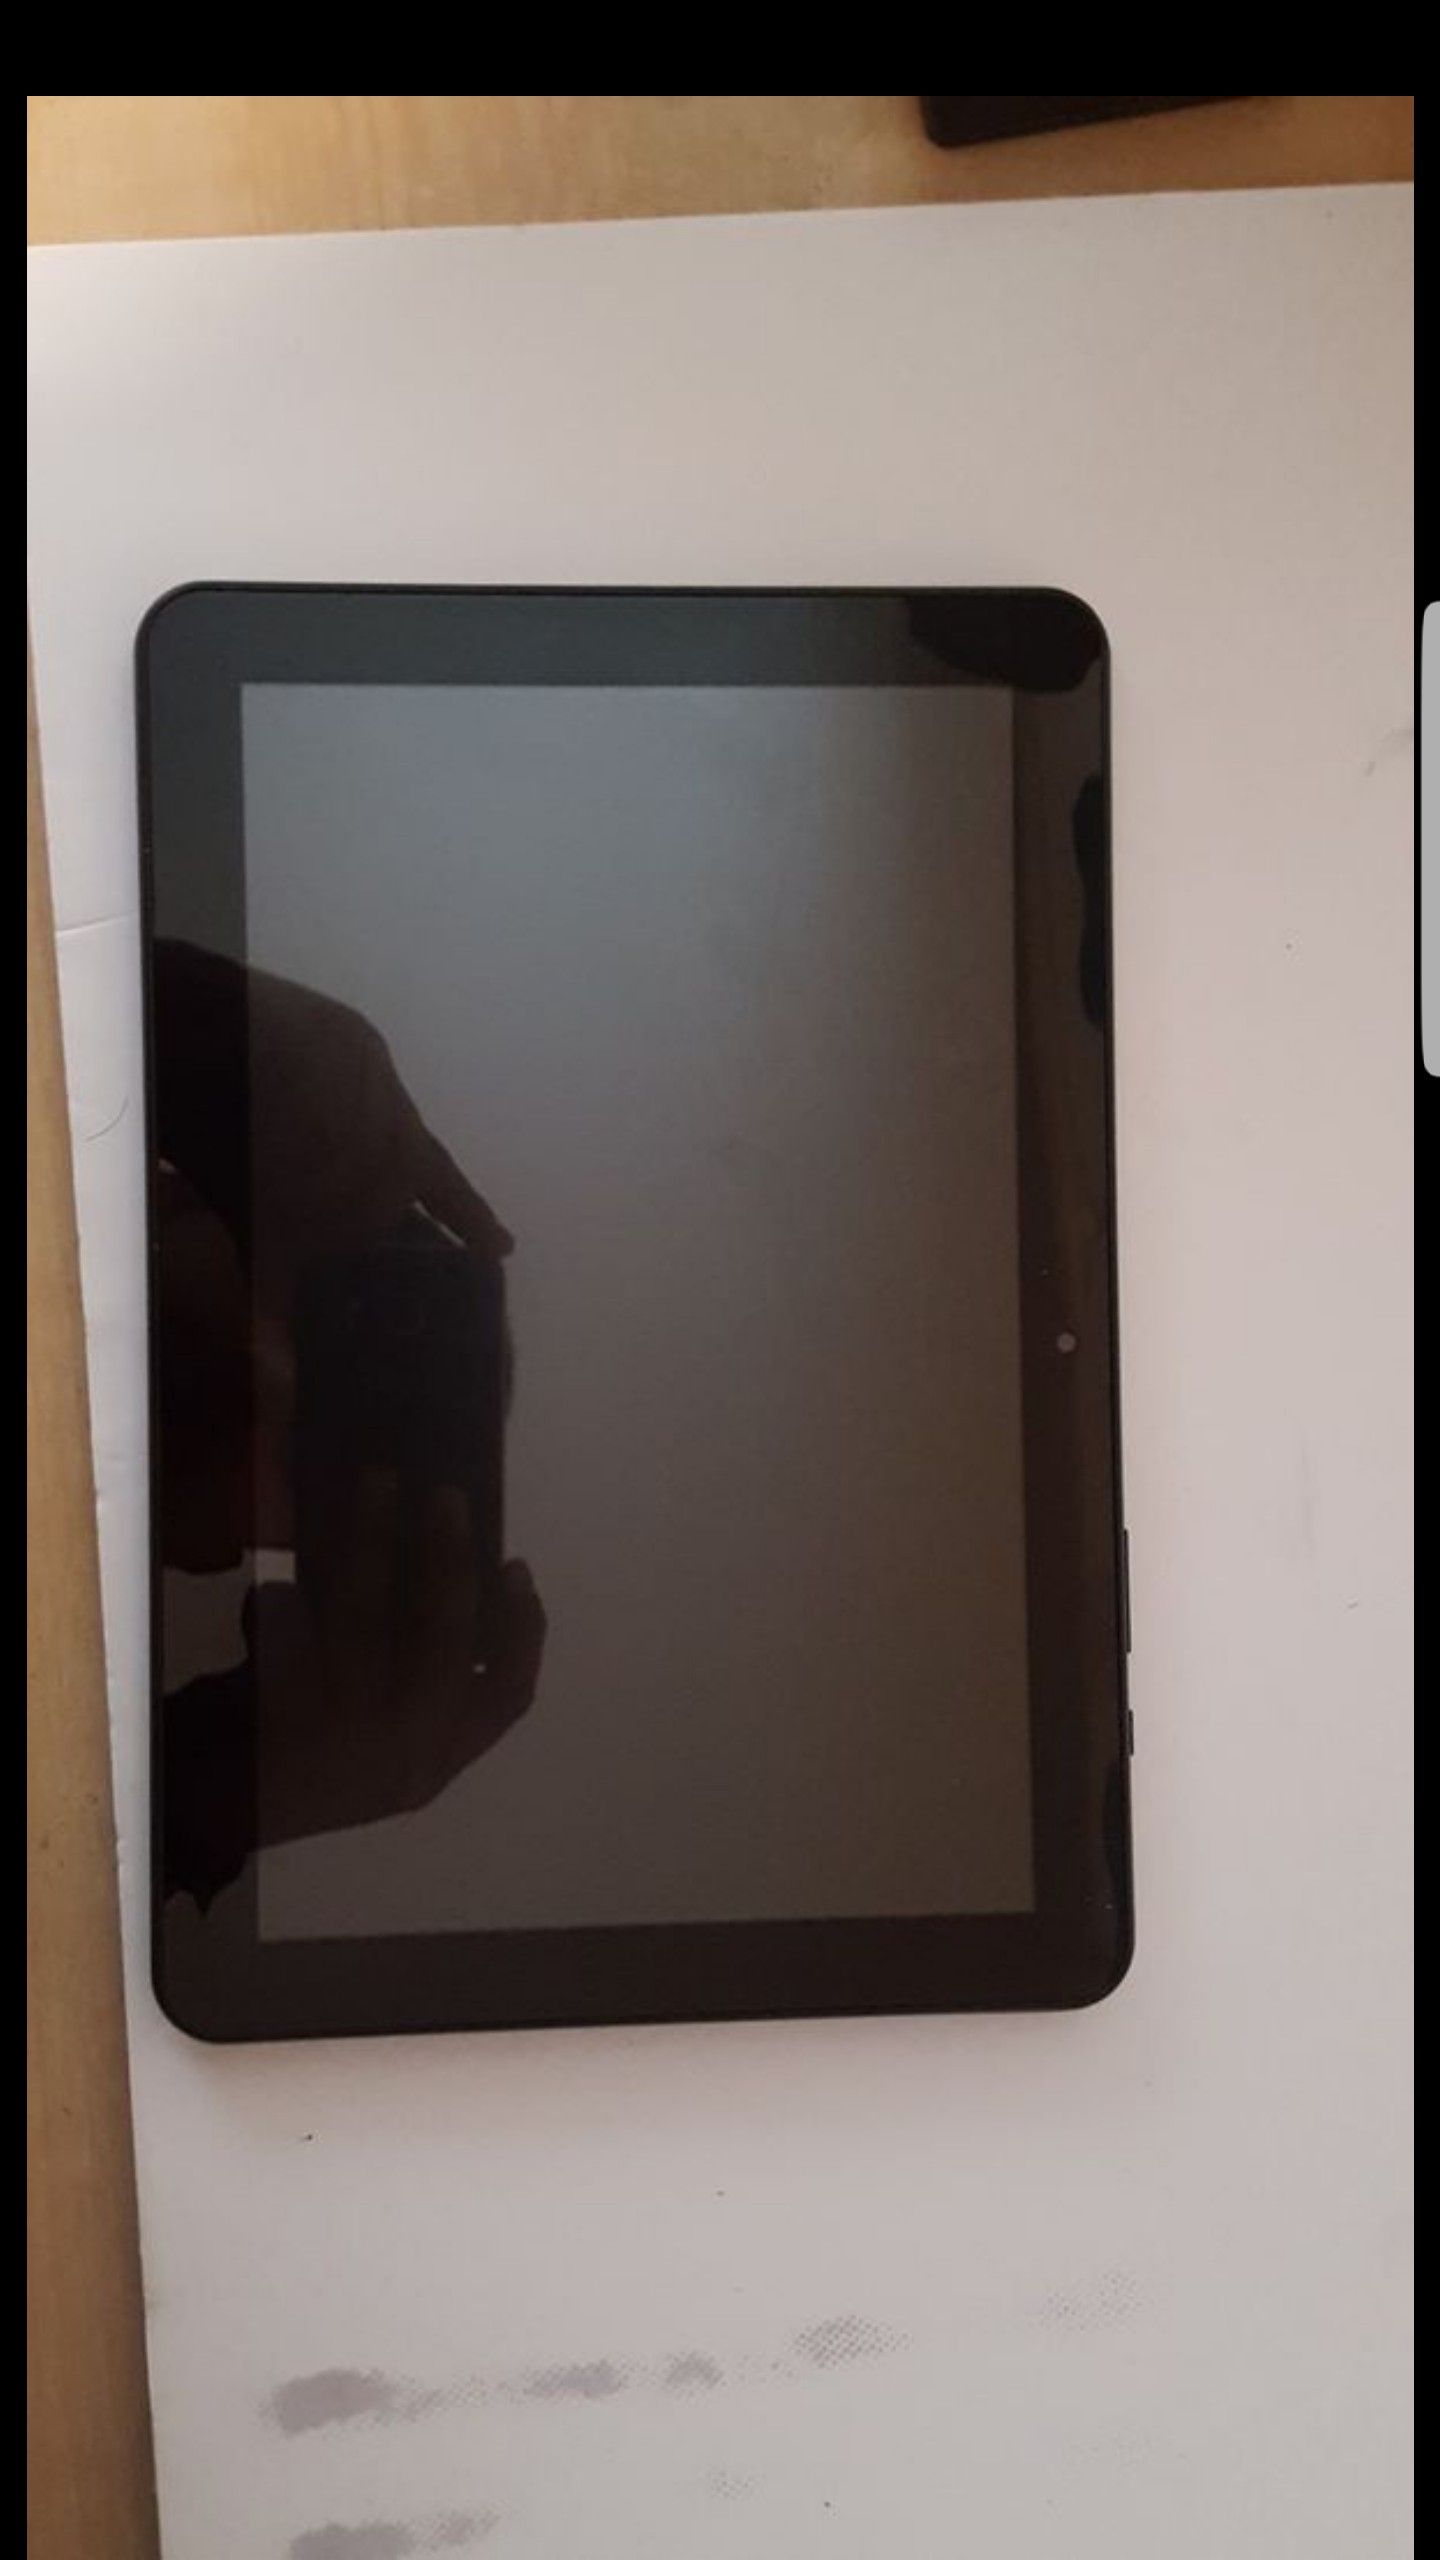 Insignia 10 in tablet made by LG sold by best buy no cracks or damage no quebrada o laqueada